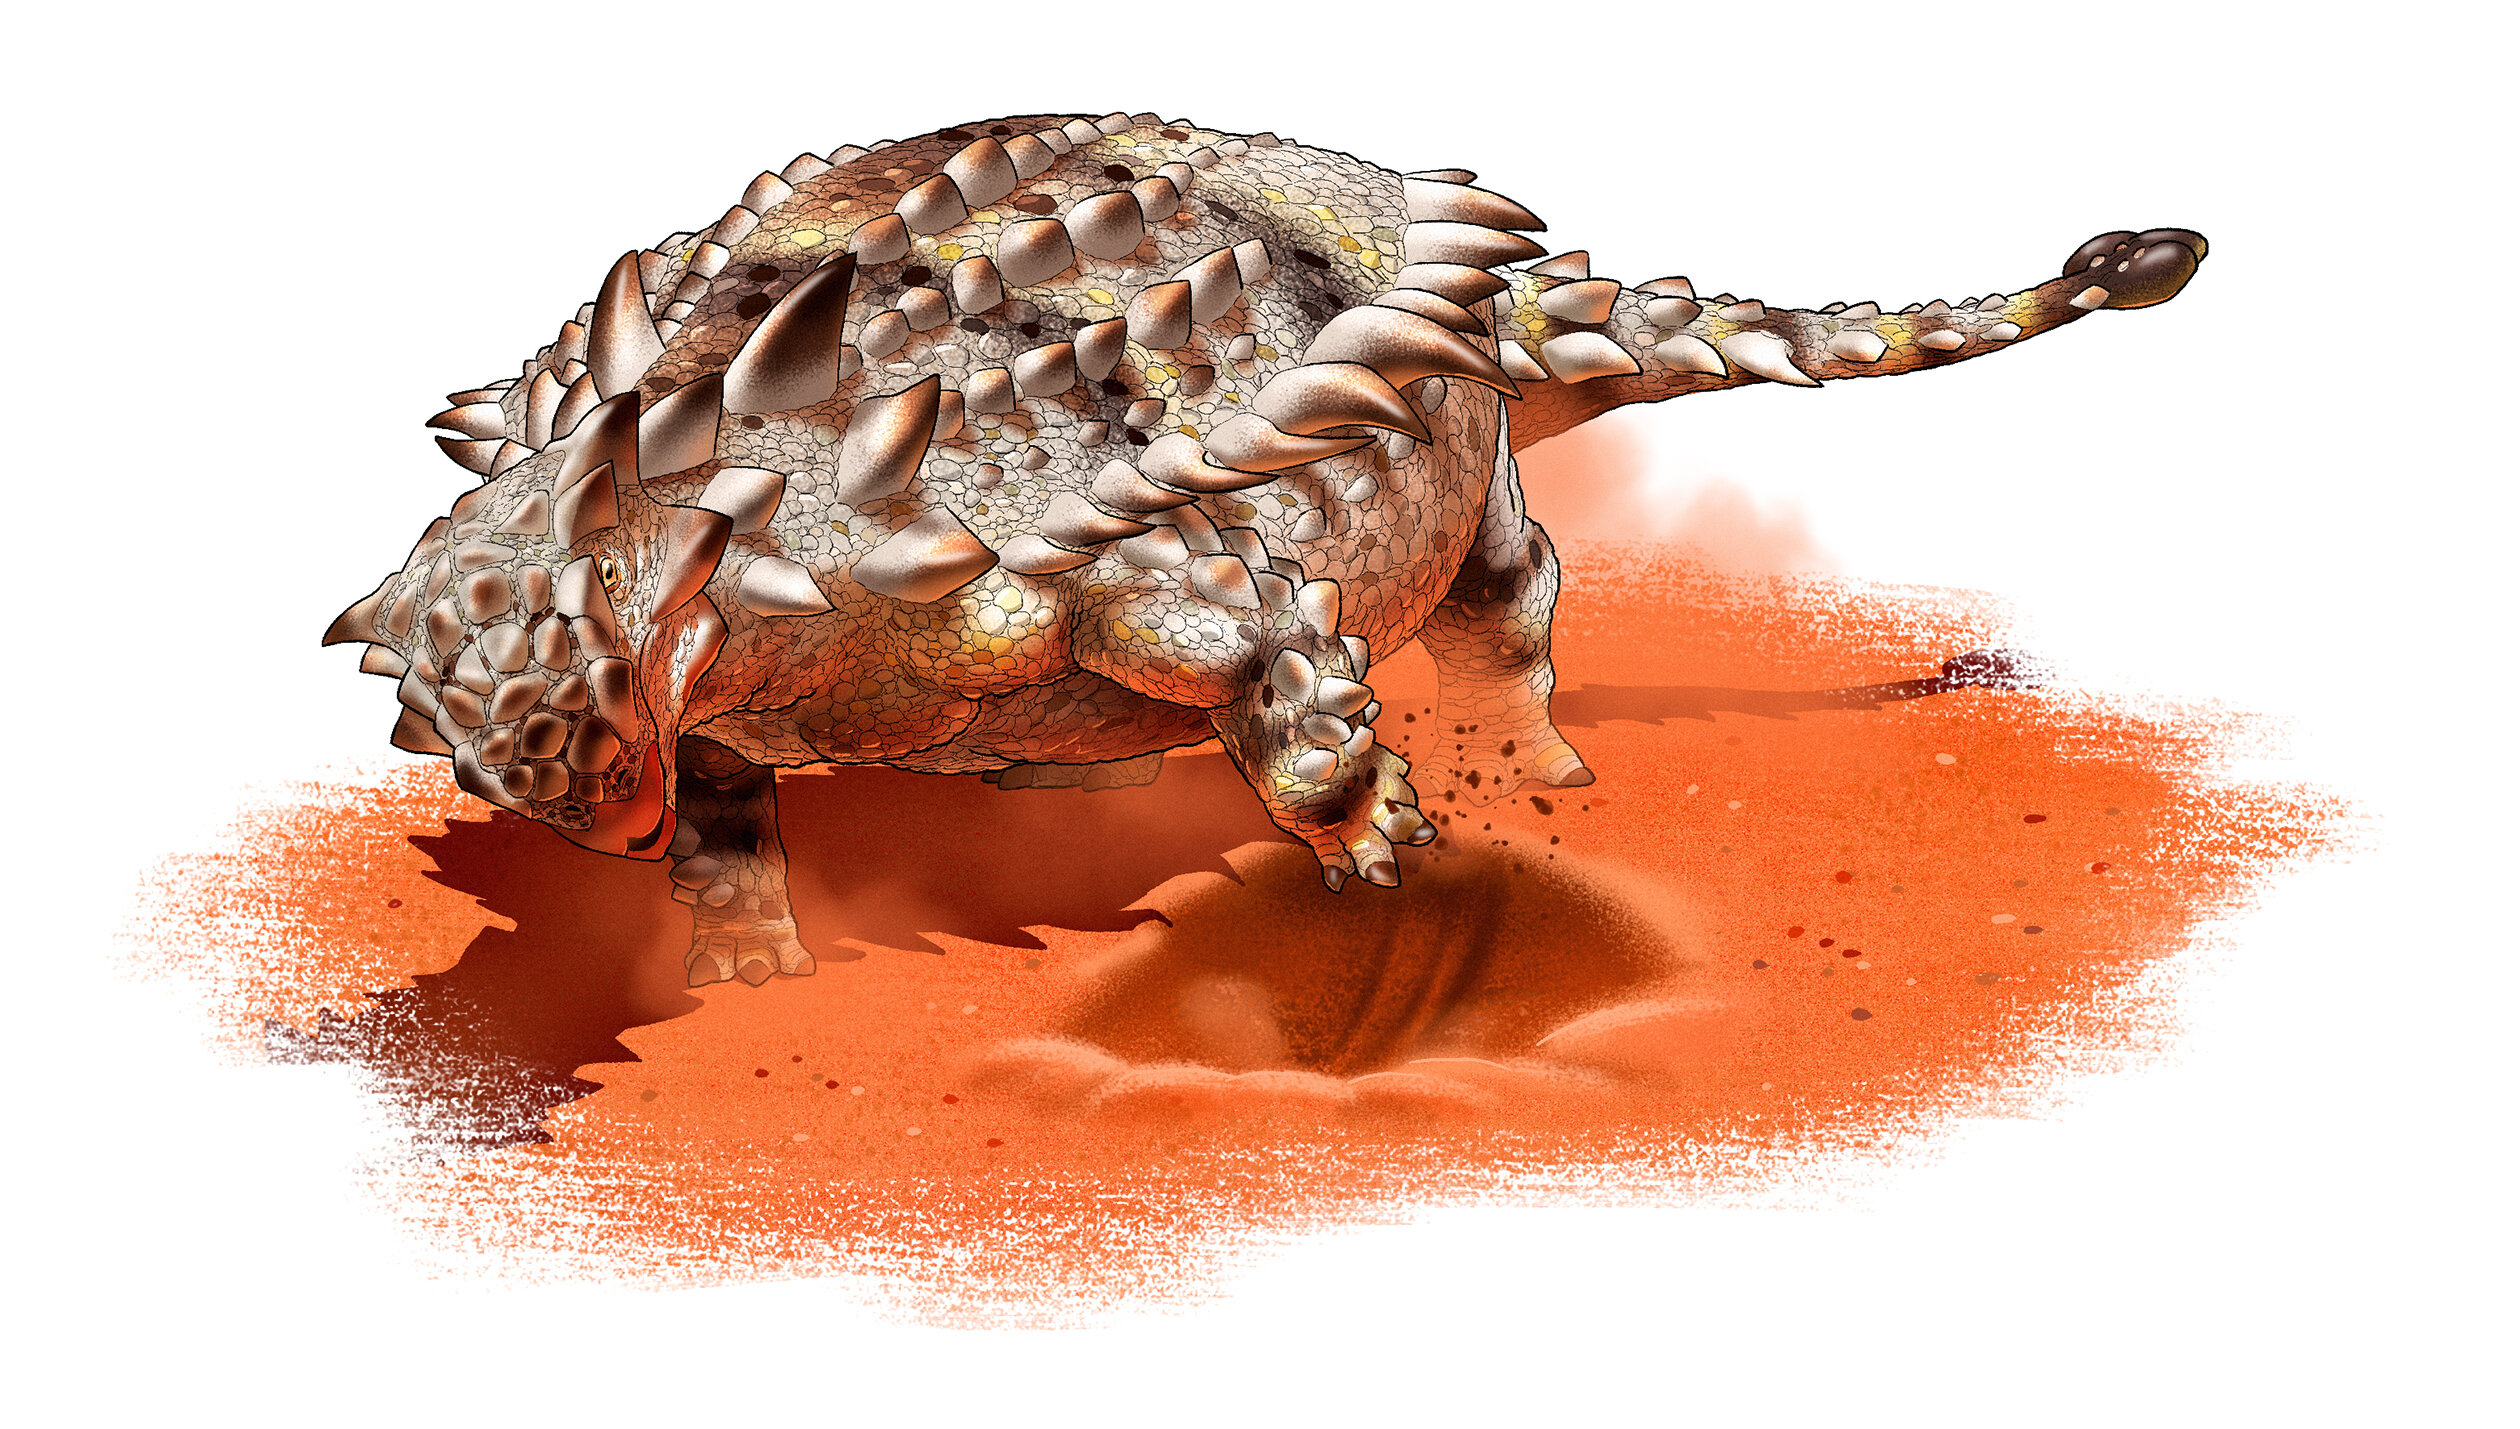 Prehistoric armoured dinosaur may have been able to